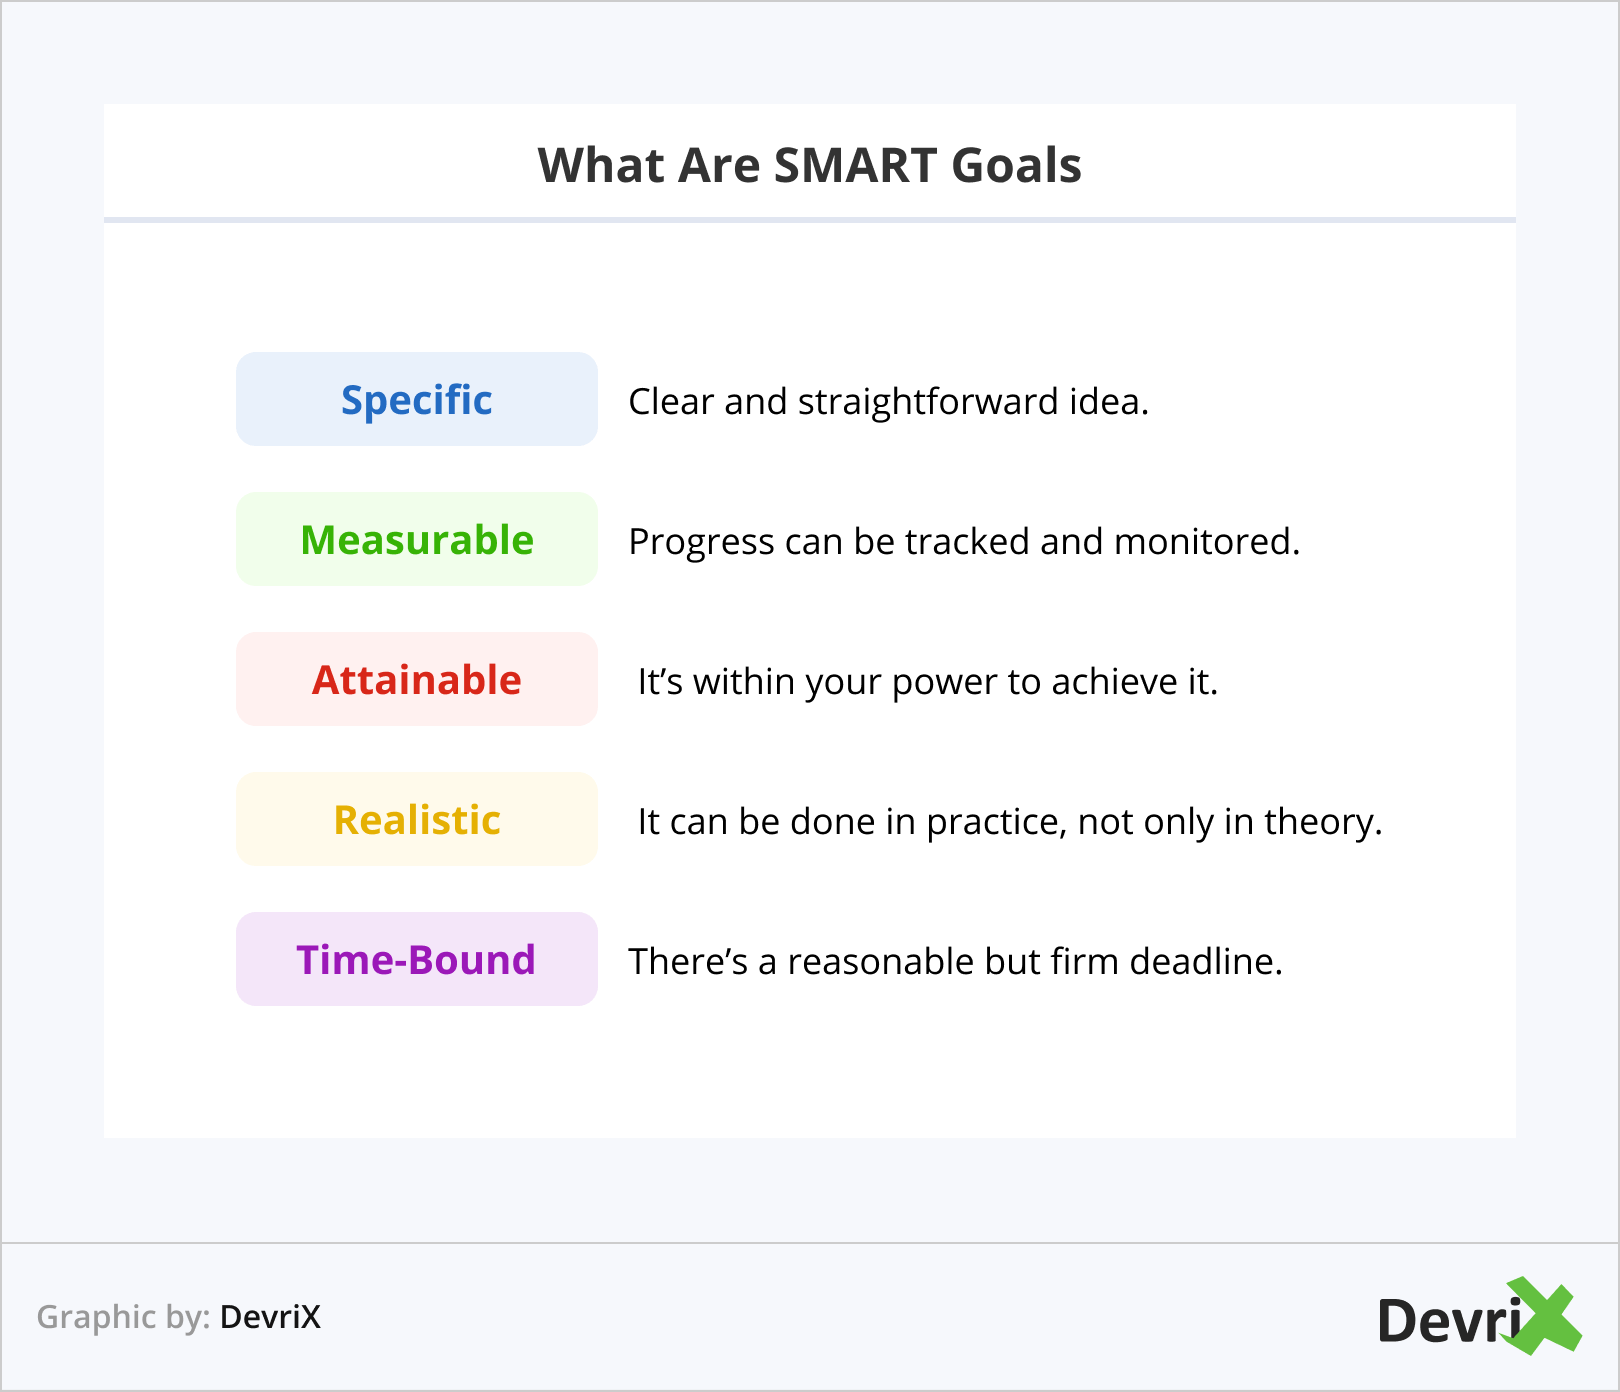 What Are SMART Goals